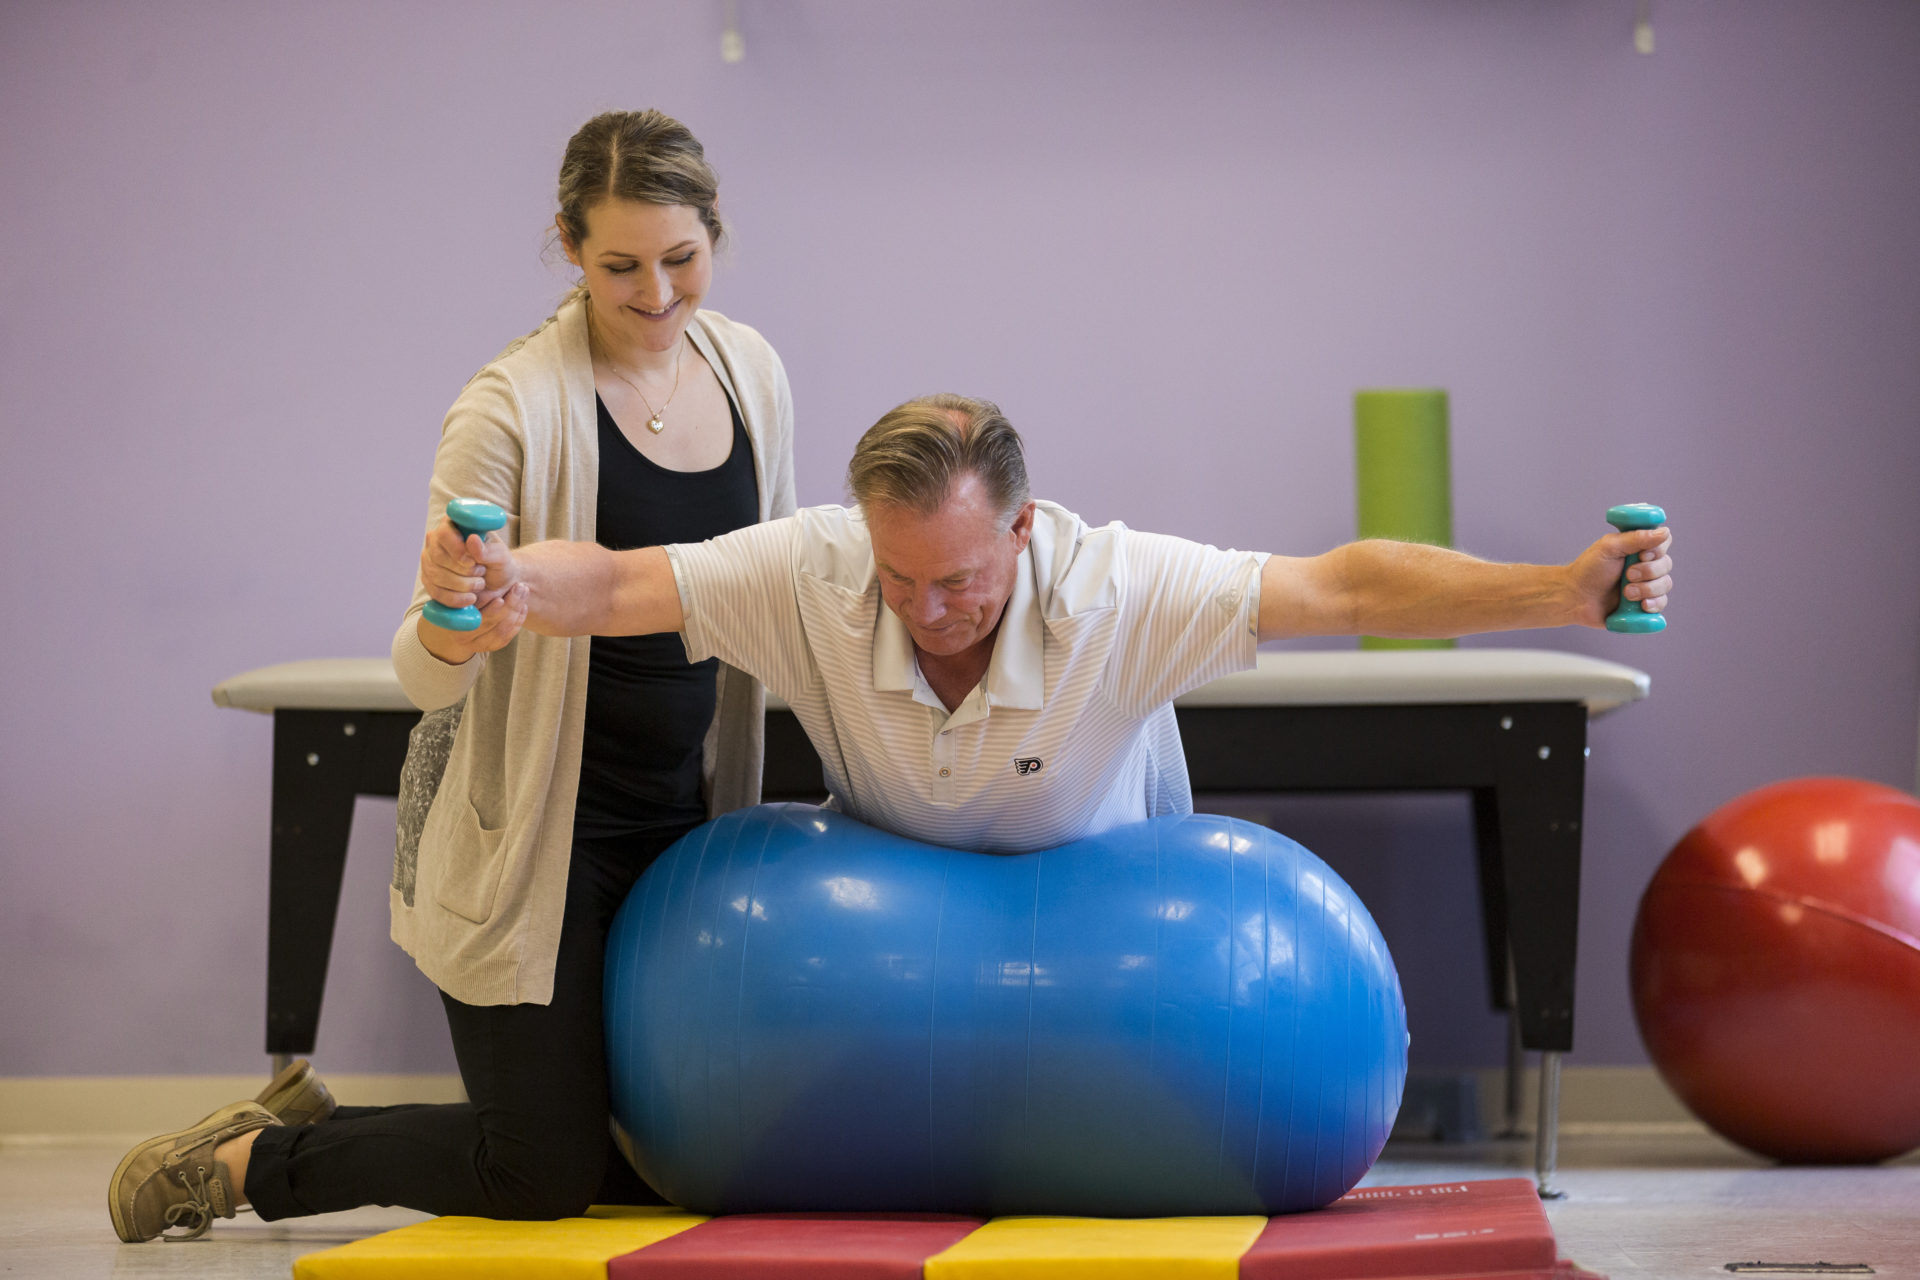 A Bancroft NeuroRehab clinician helping Brian Propp during a Physical Therapy Session. Brian is laying on an excercise ball while holding weights in each hand. His arms are spread out.